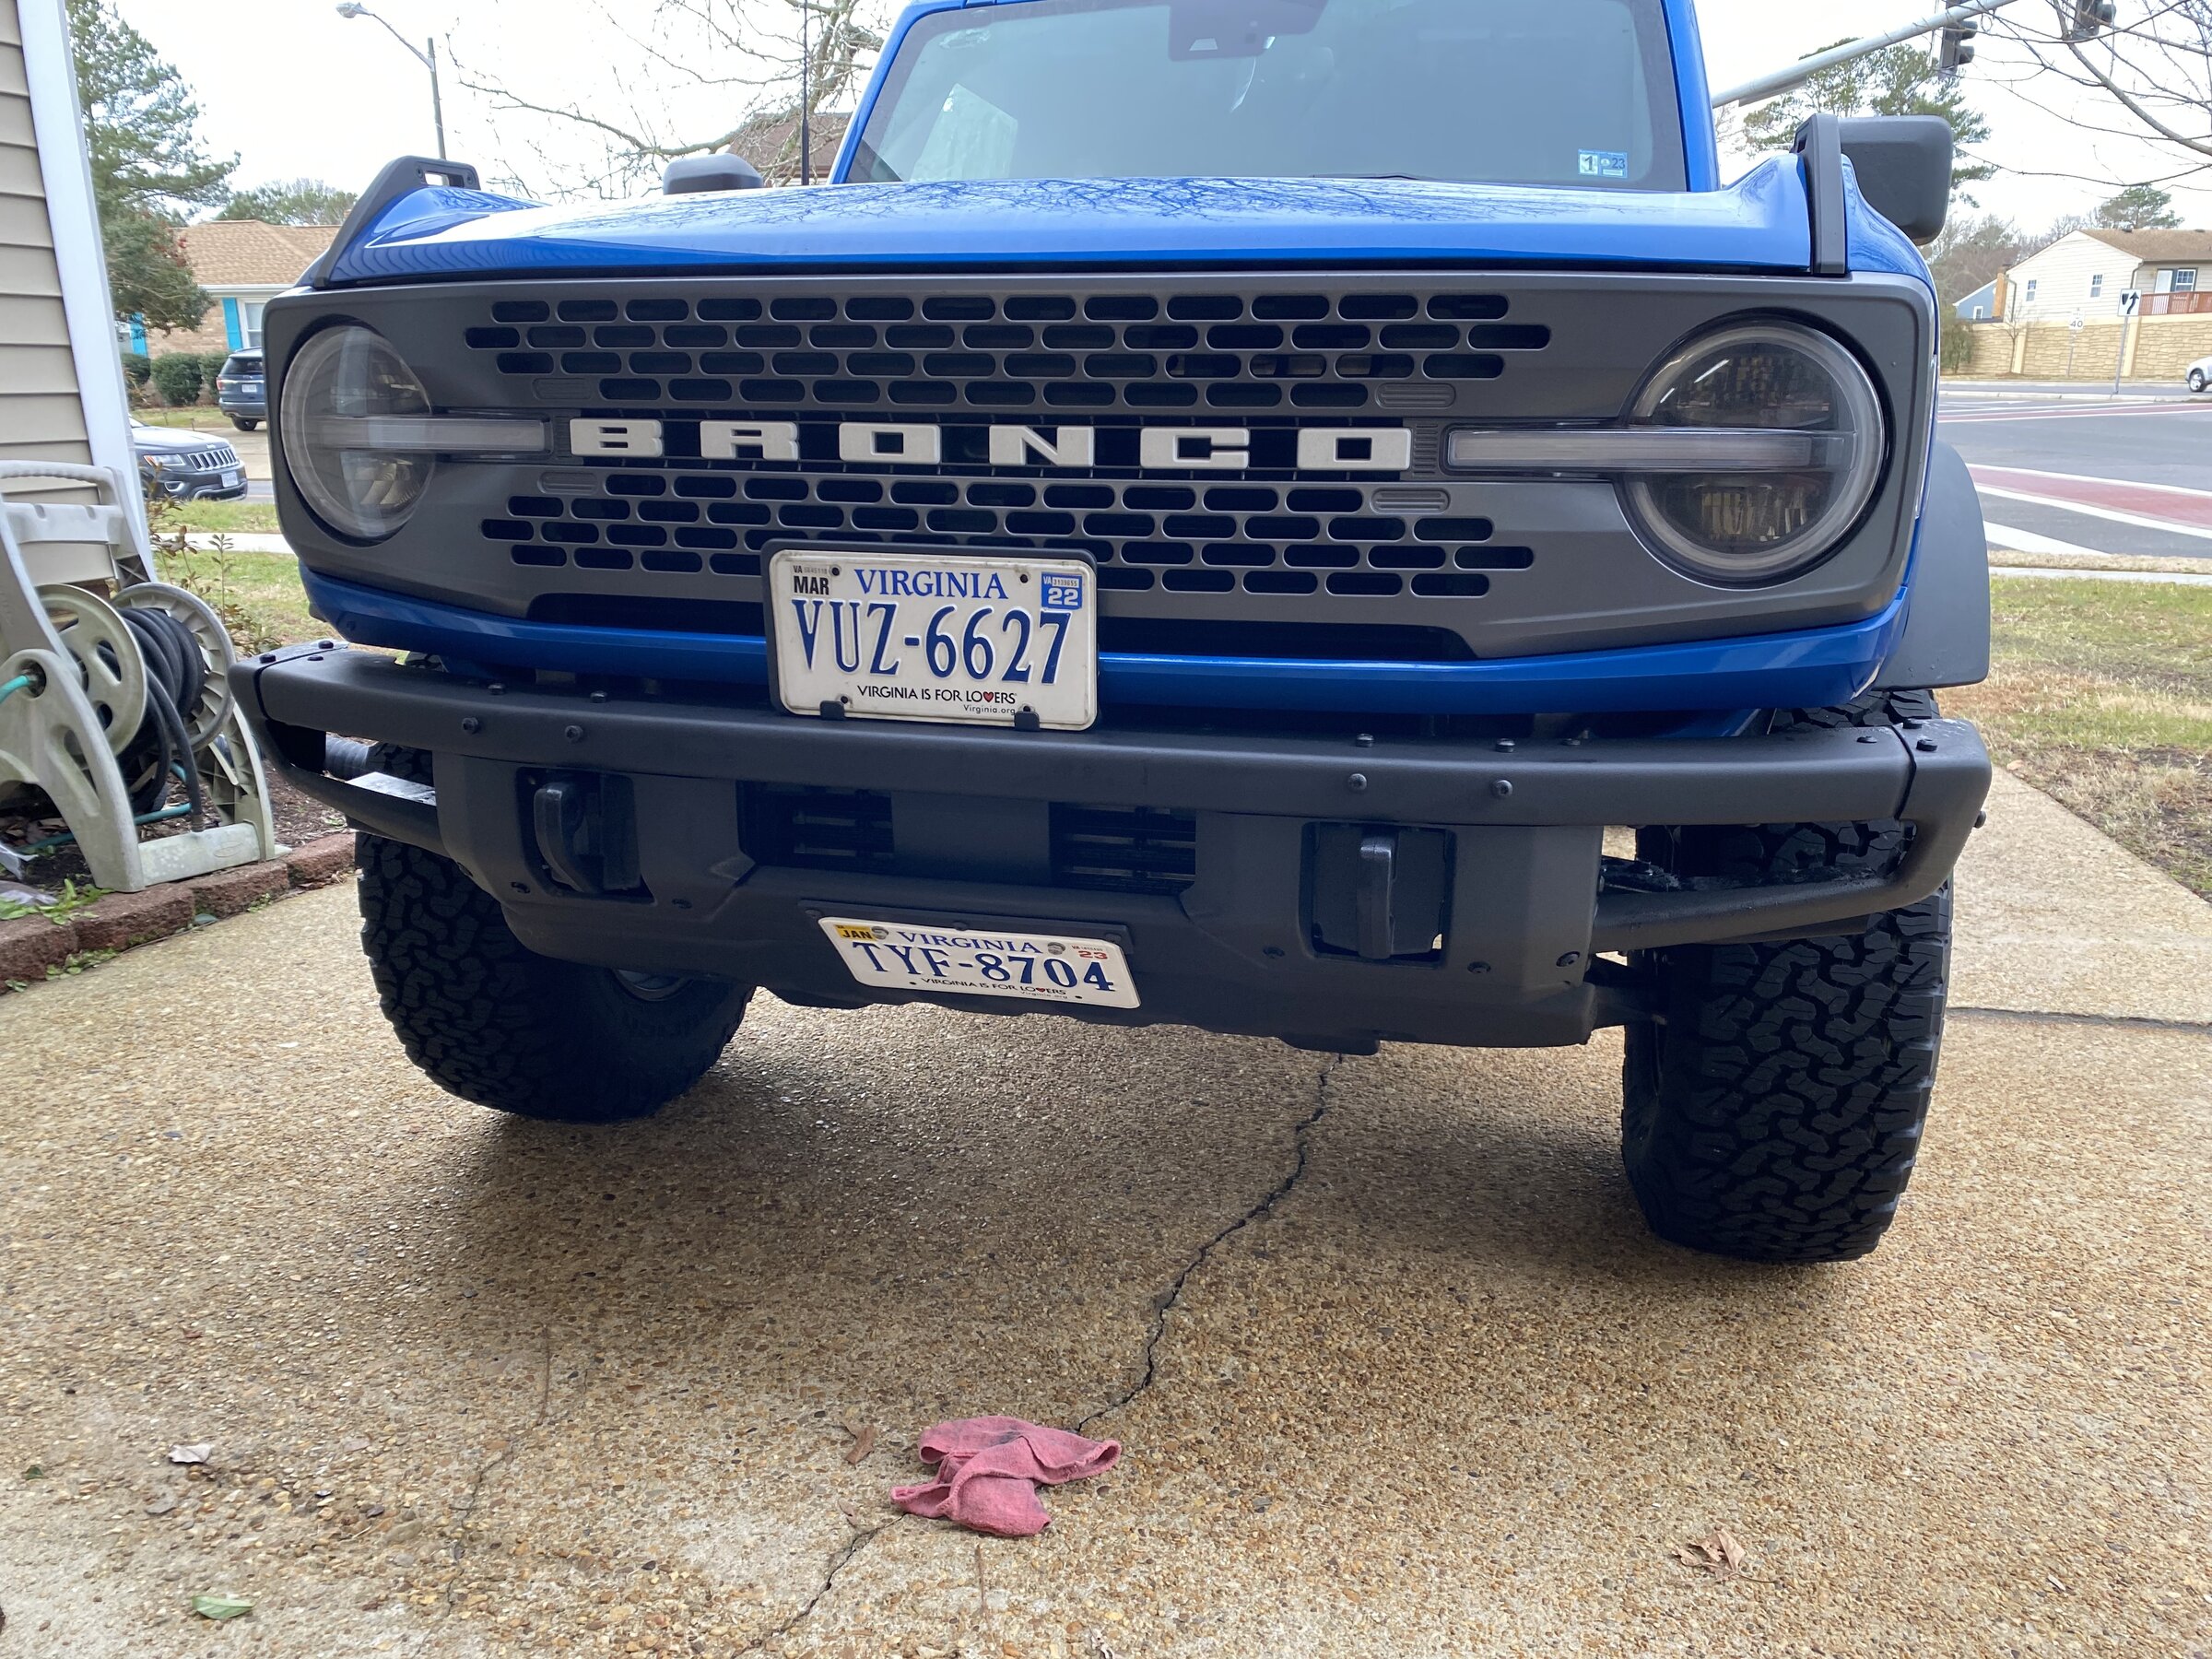 Ford Bronco DIY Front License Plate Relocation tempImage185q2B